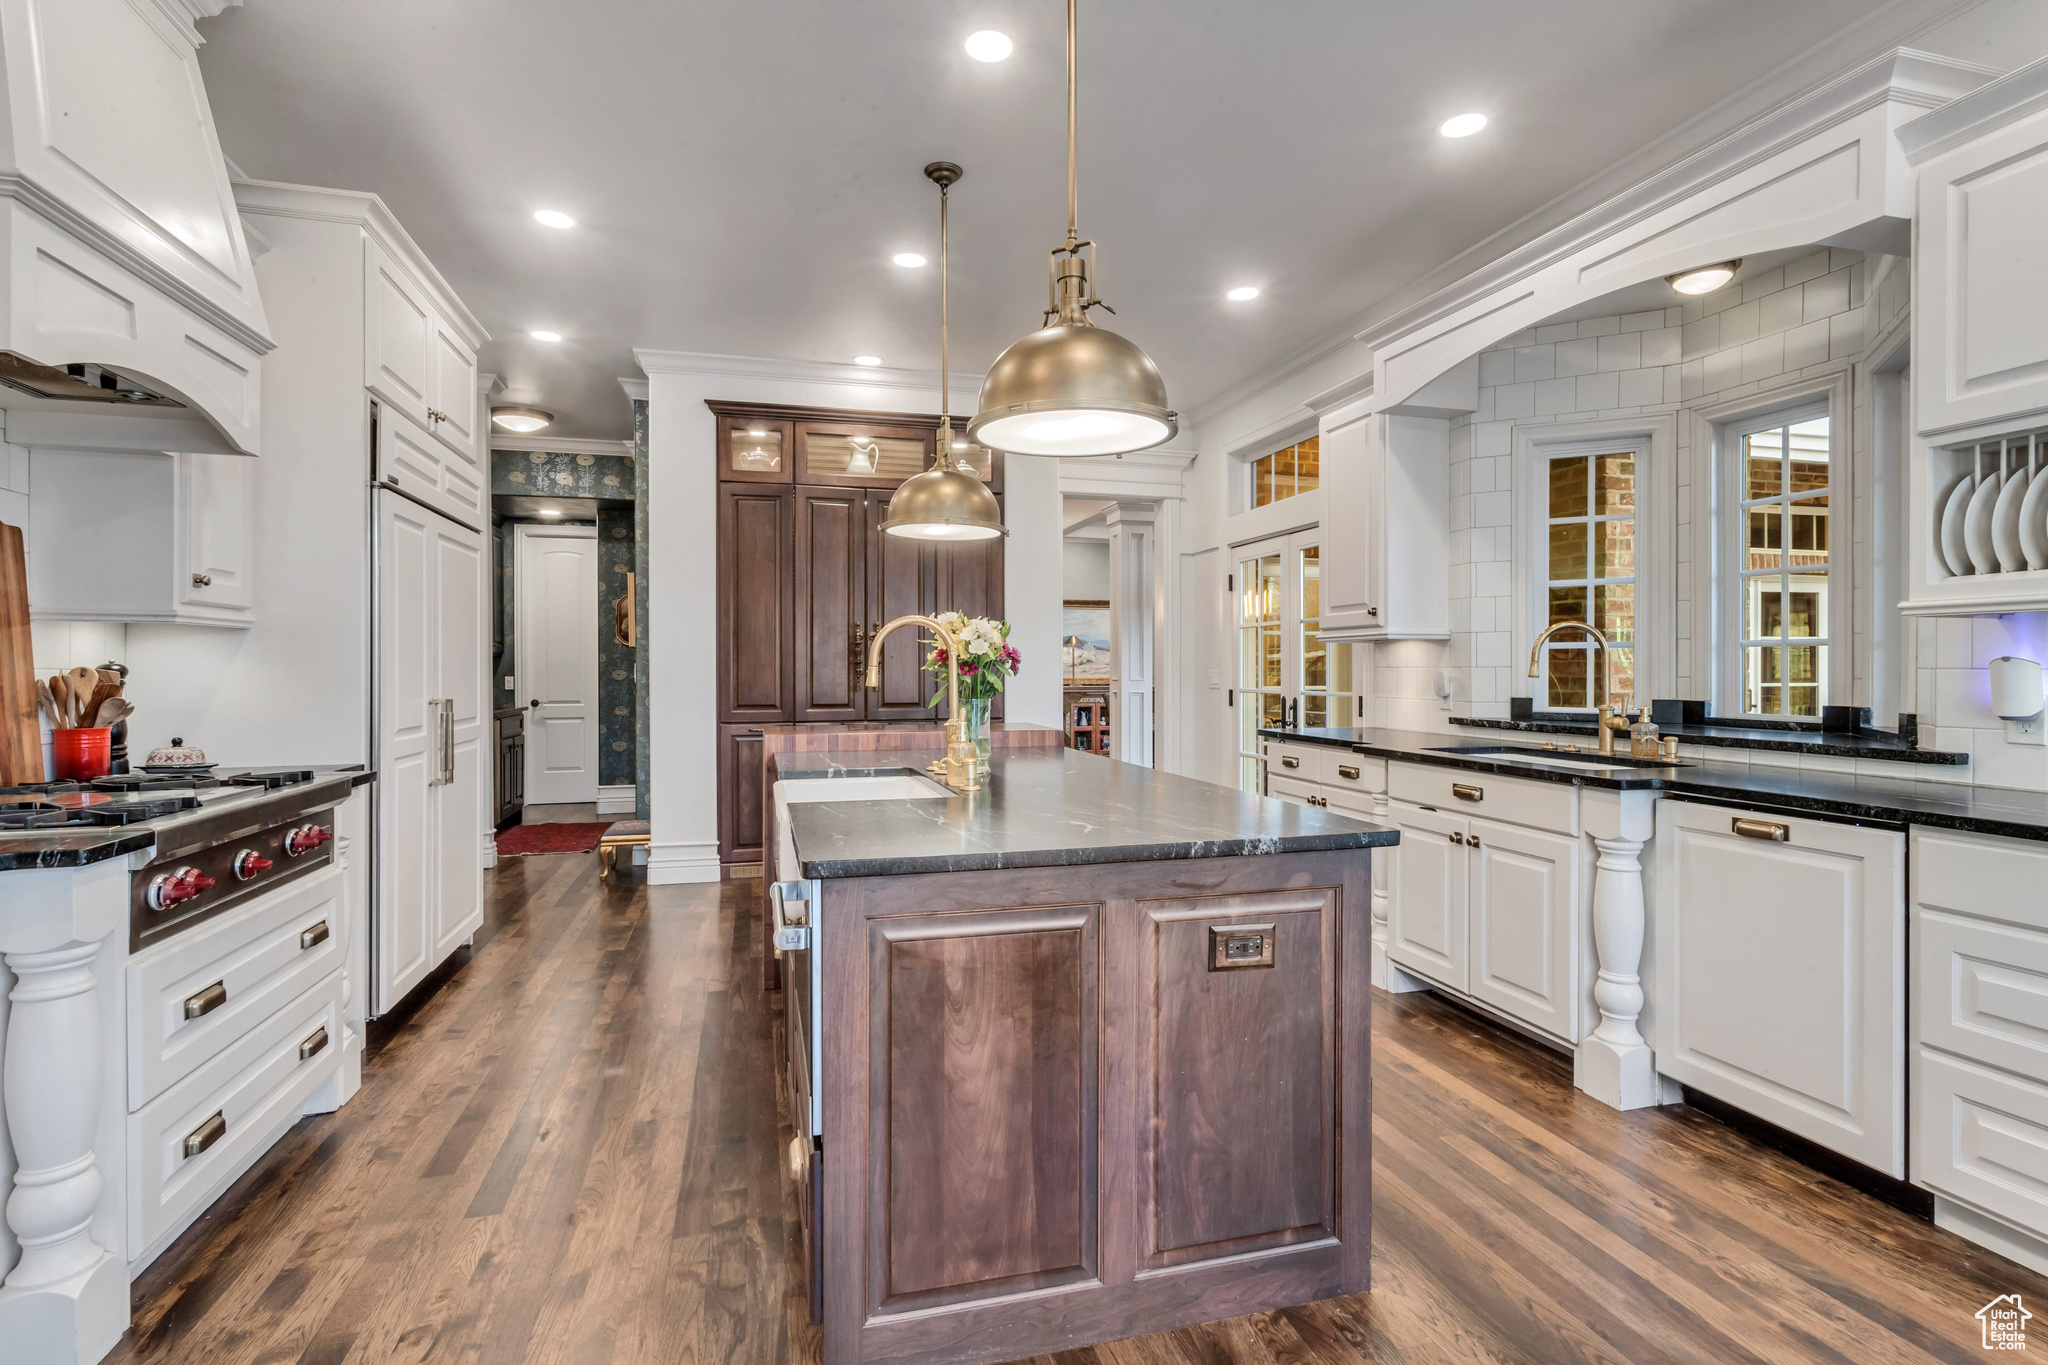 Kitchen featuring white cabinets, sink, dark wood flooring, and a center island with sink